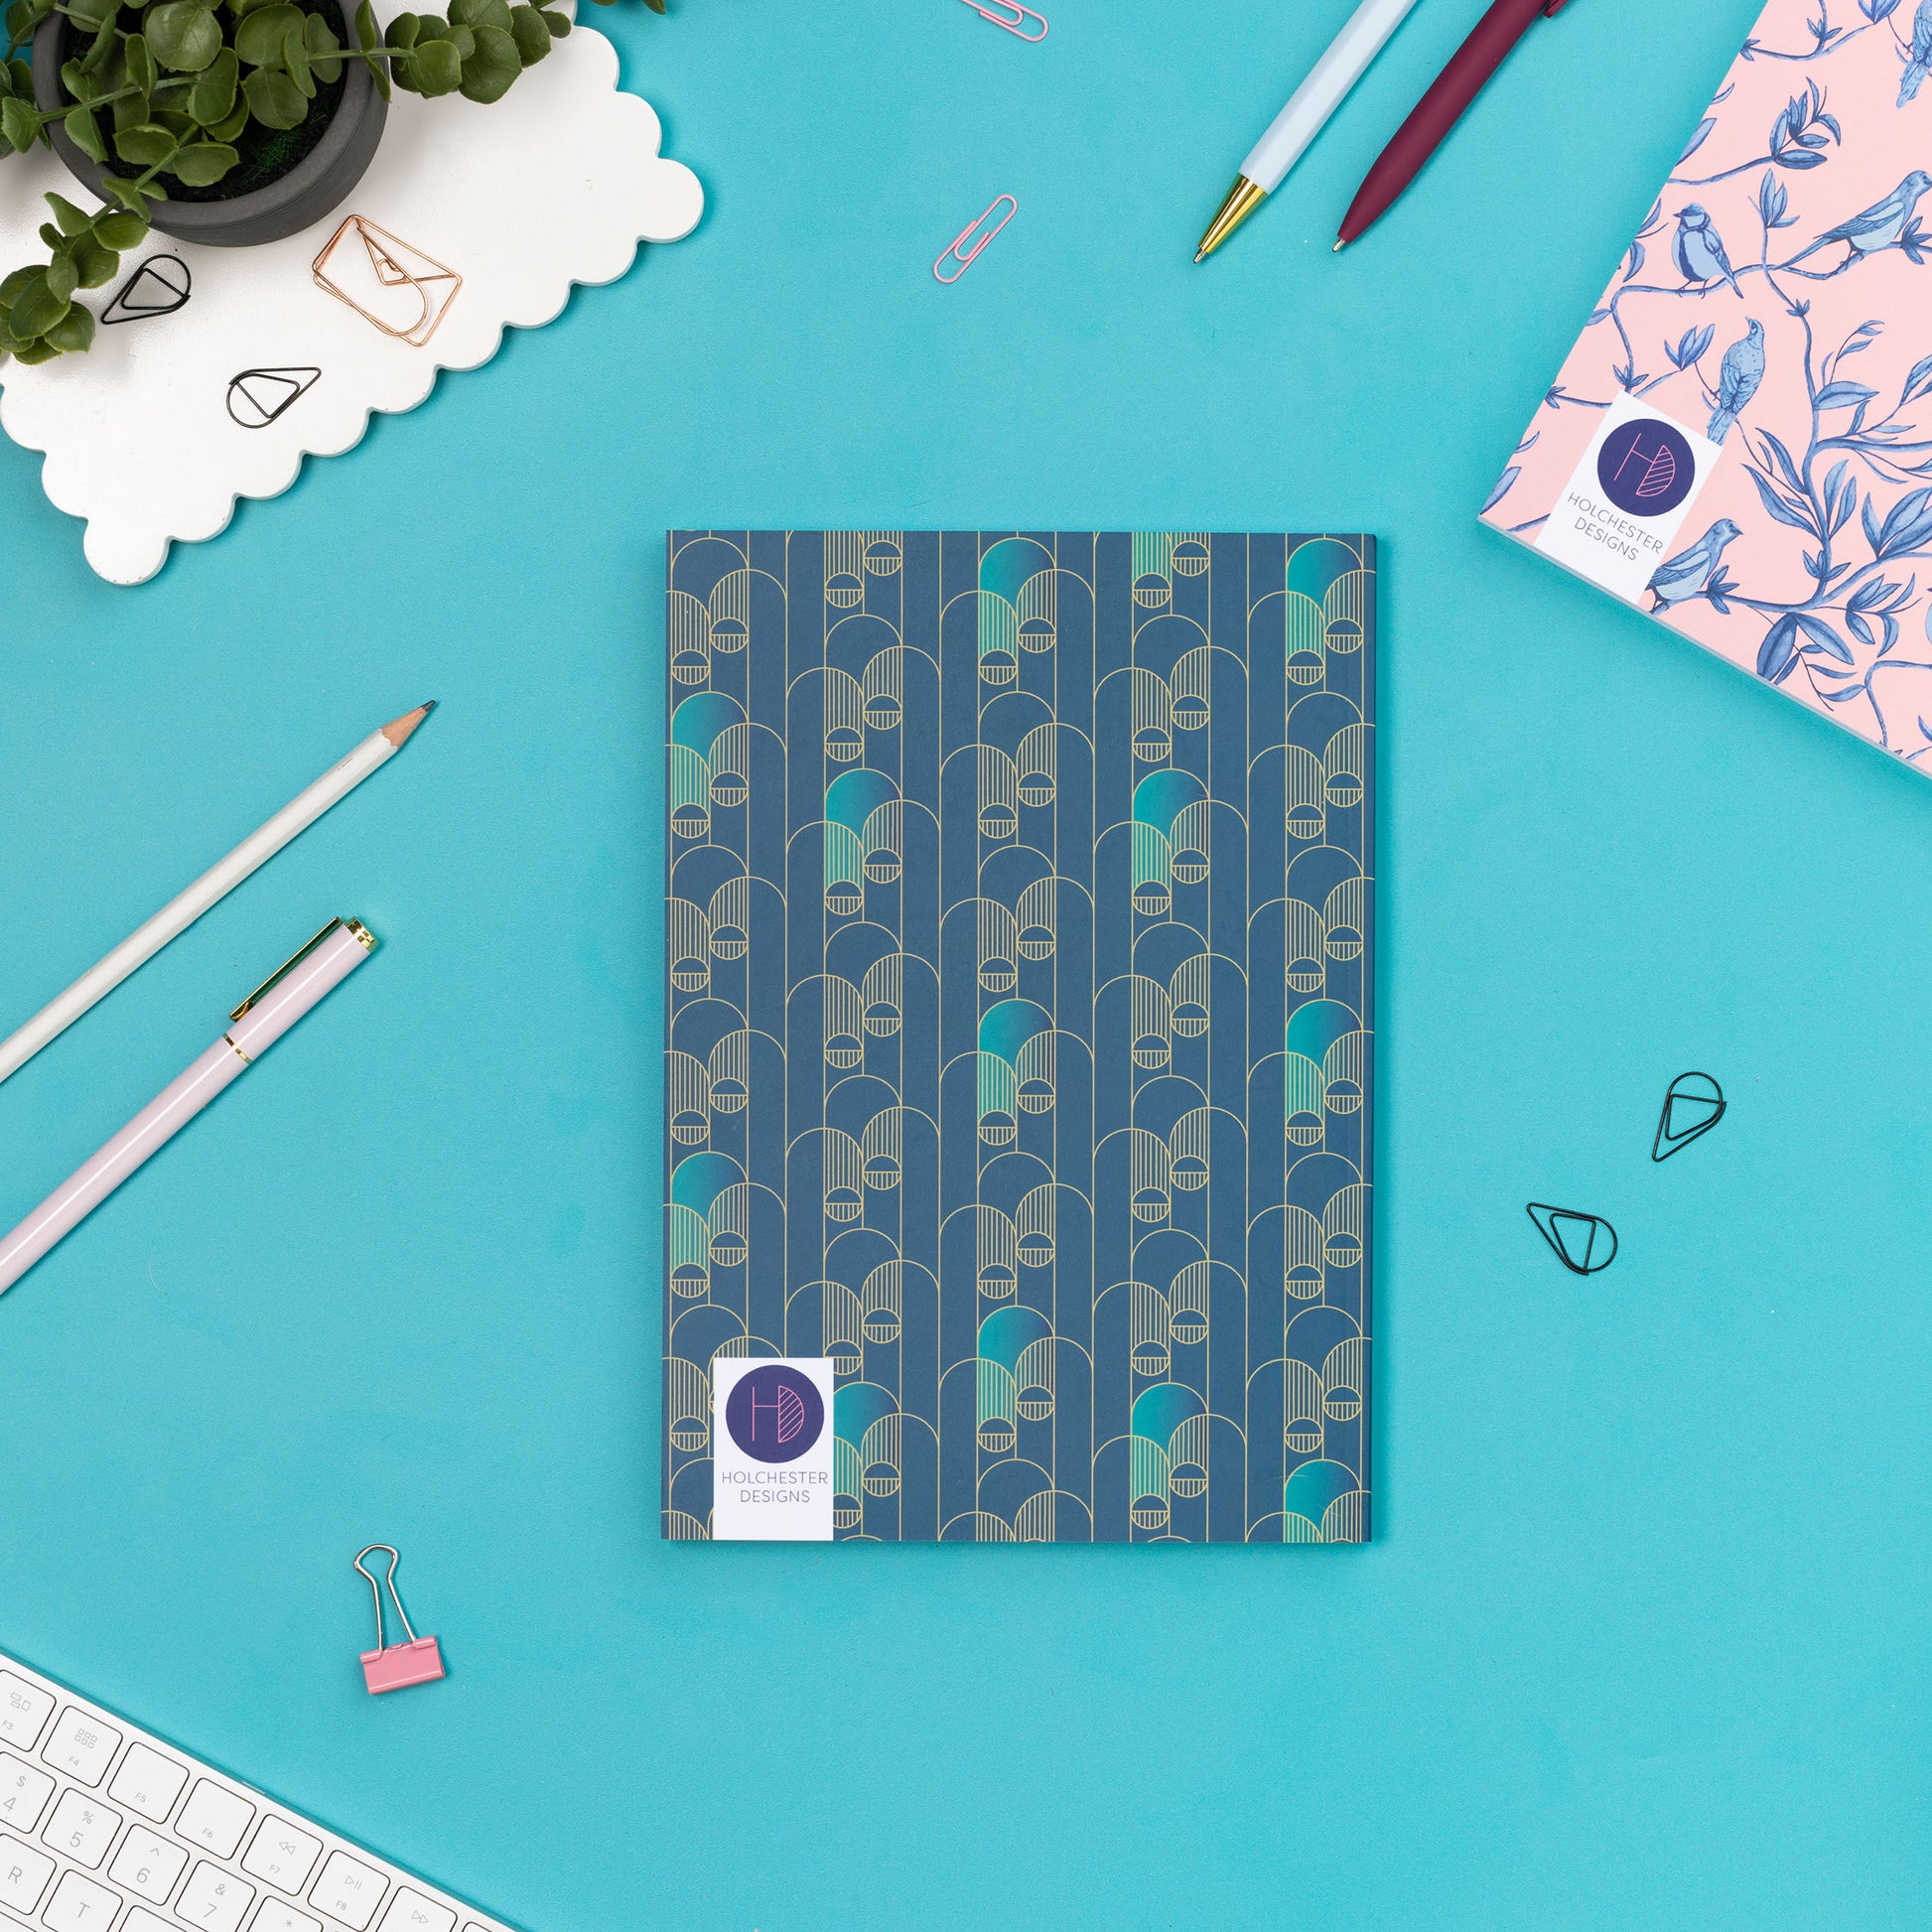 The back of the Deco Delights B5 Notebook is facing up on a teal desk with pens and paperclips scattered around it.  There is also a white keyboard to the bottom left, a small plant to the top left of the image and the bottom corner of a Brighton Birds dot grid notebook appears in the top right corner.